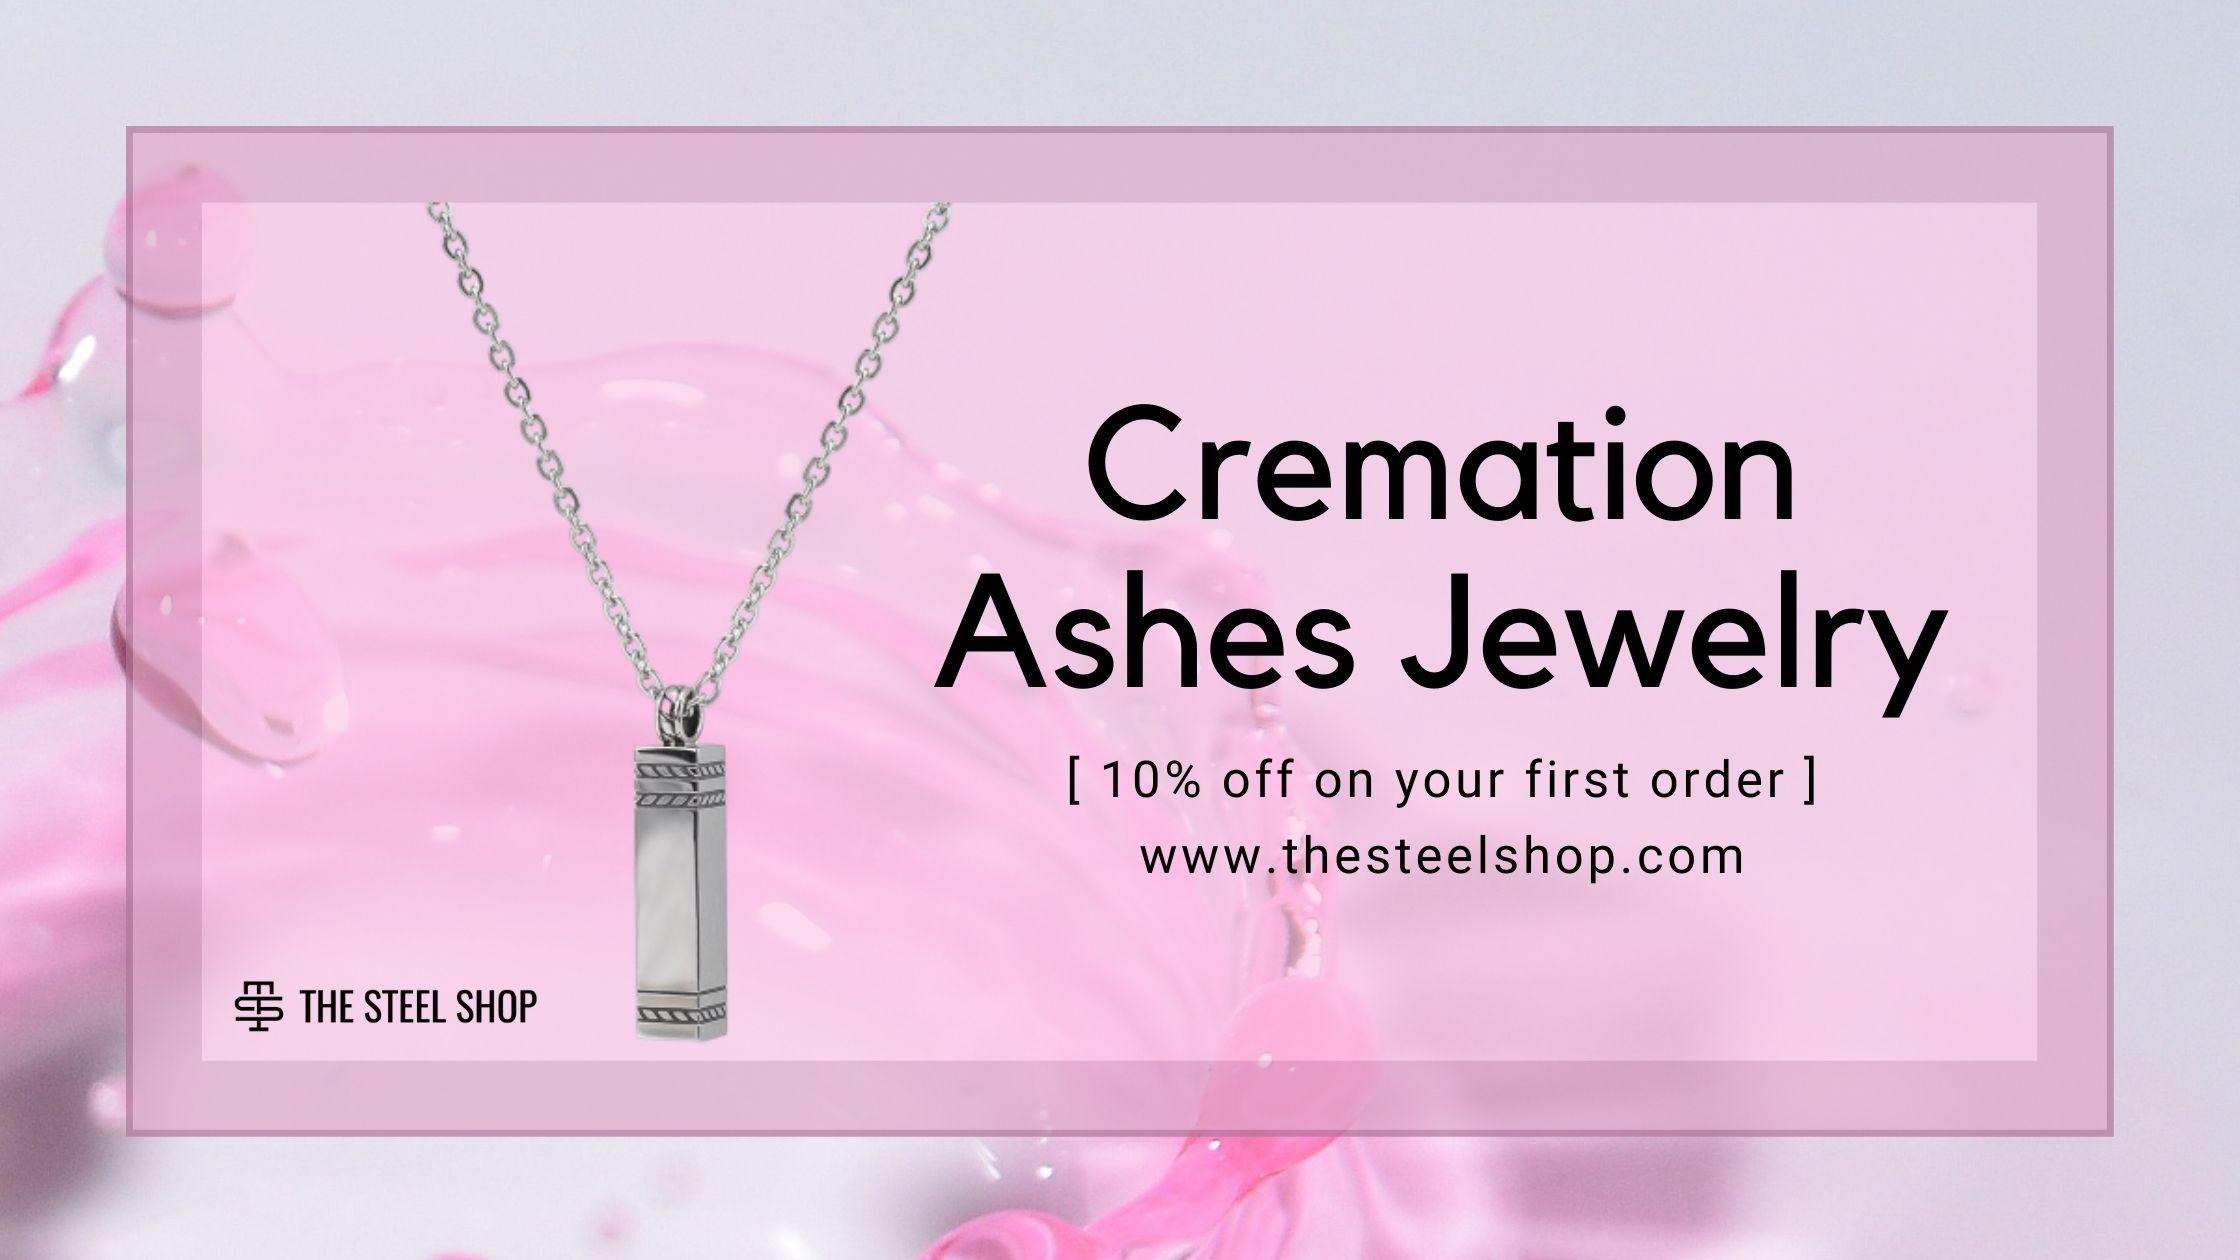 A Complete Guide to Cremation Jewelry